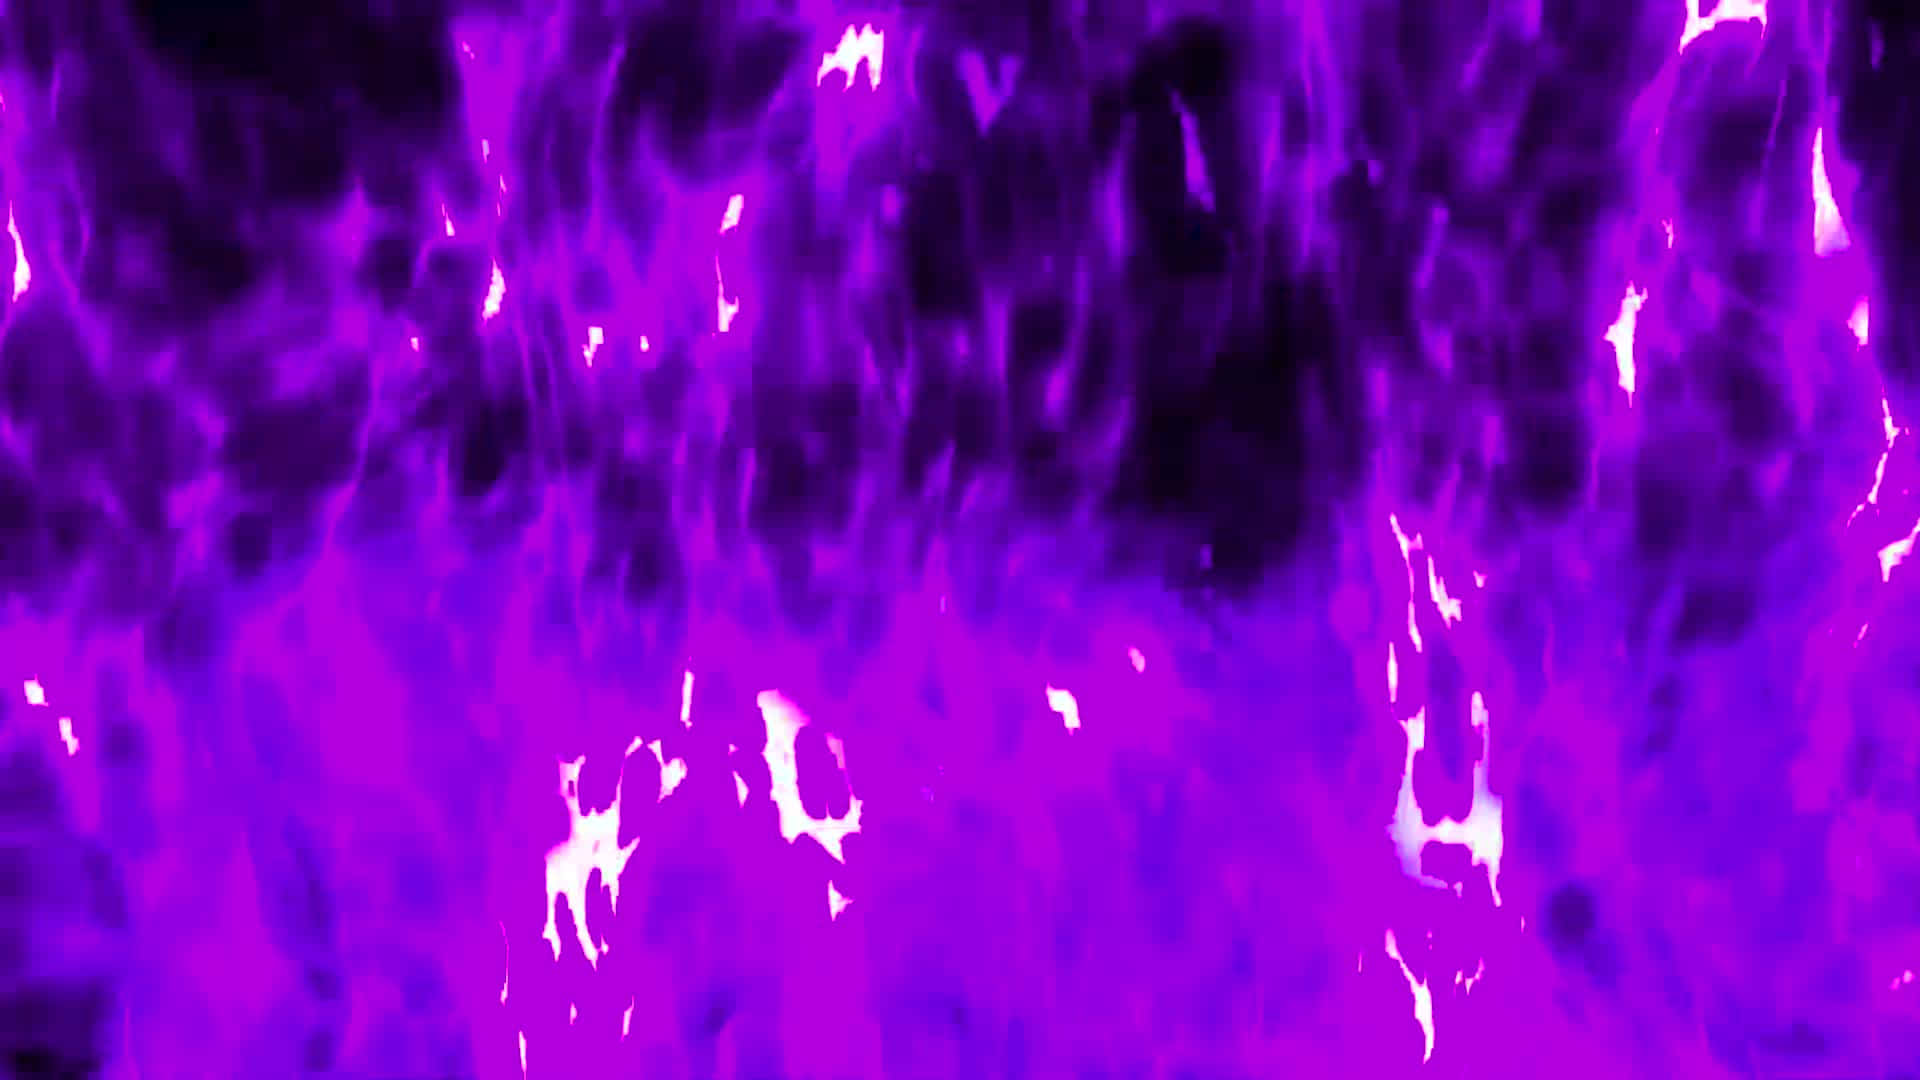 Purple Flames In A Black Background